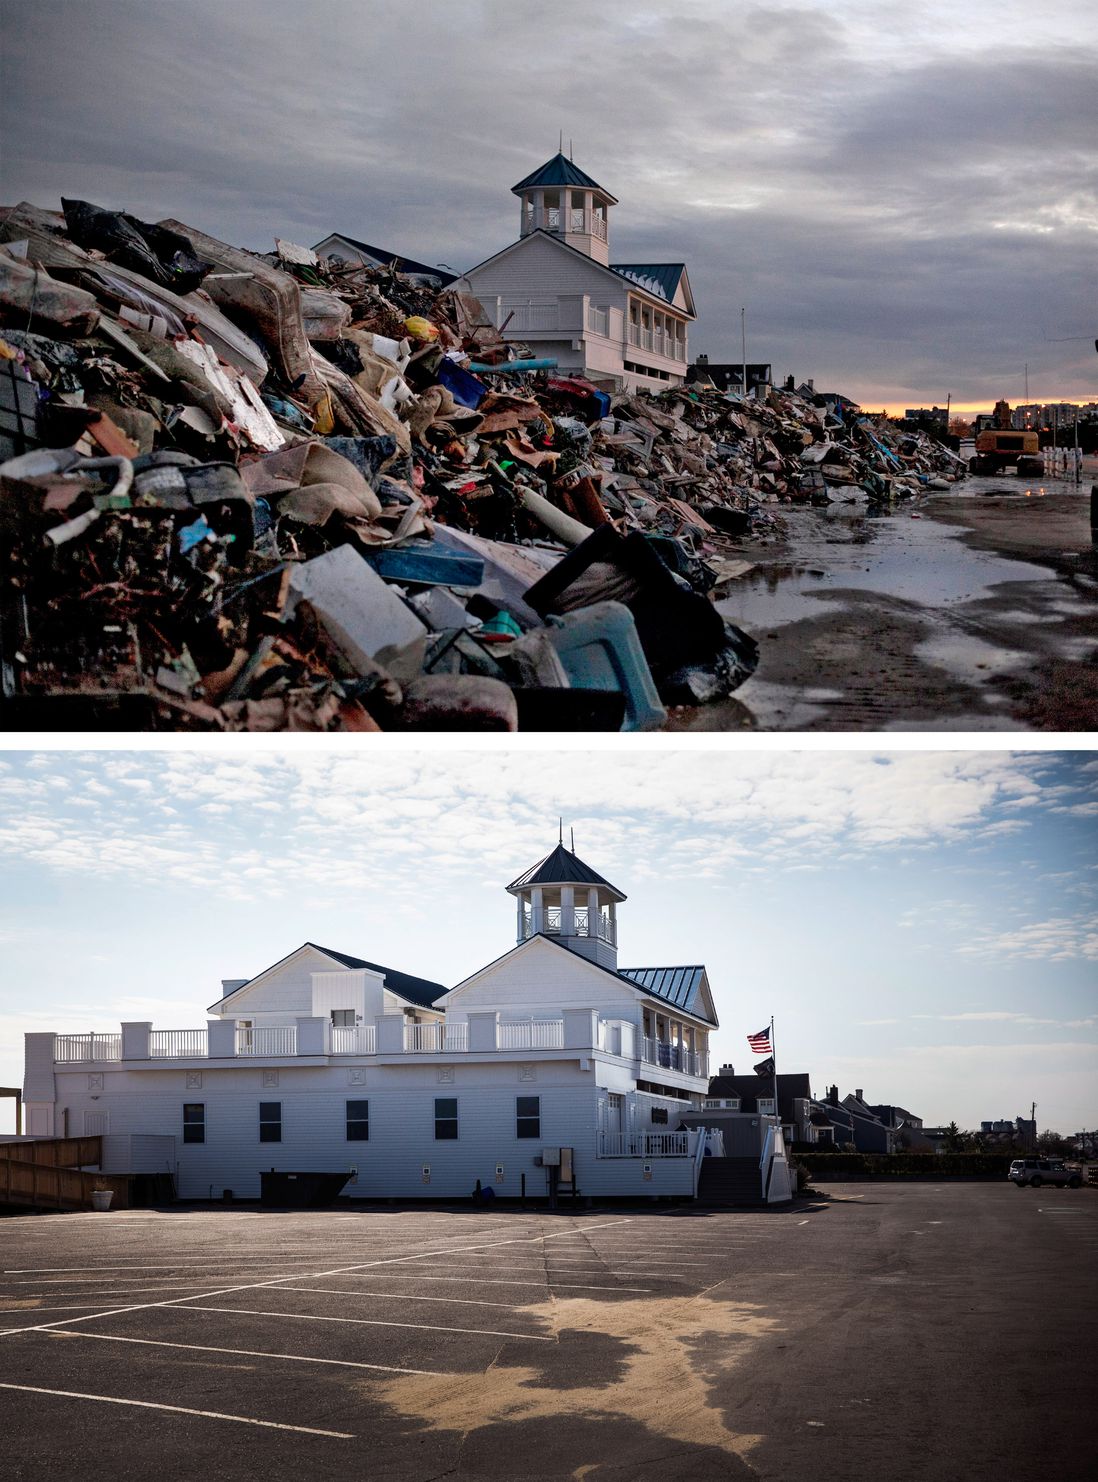 [Top] The Monmouth Beach pavilion is surrounded by debris caused by Superstorm Sandy on November 8, 2012 in Monmouth, New Jersey. [Bottom] The Monmouth Beach pavilion is shown October 22, 2013 in Monmouth, New Jersey.